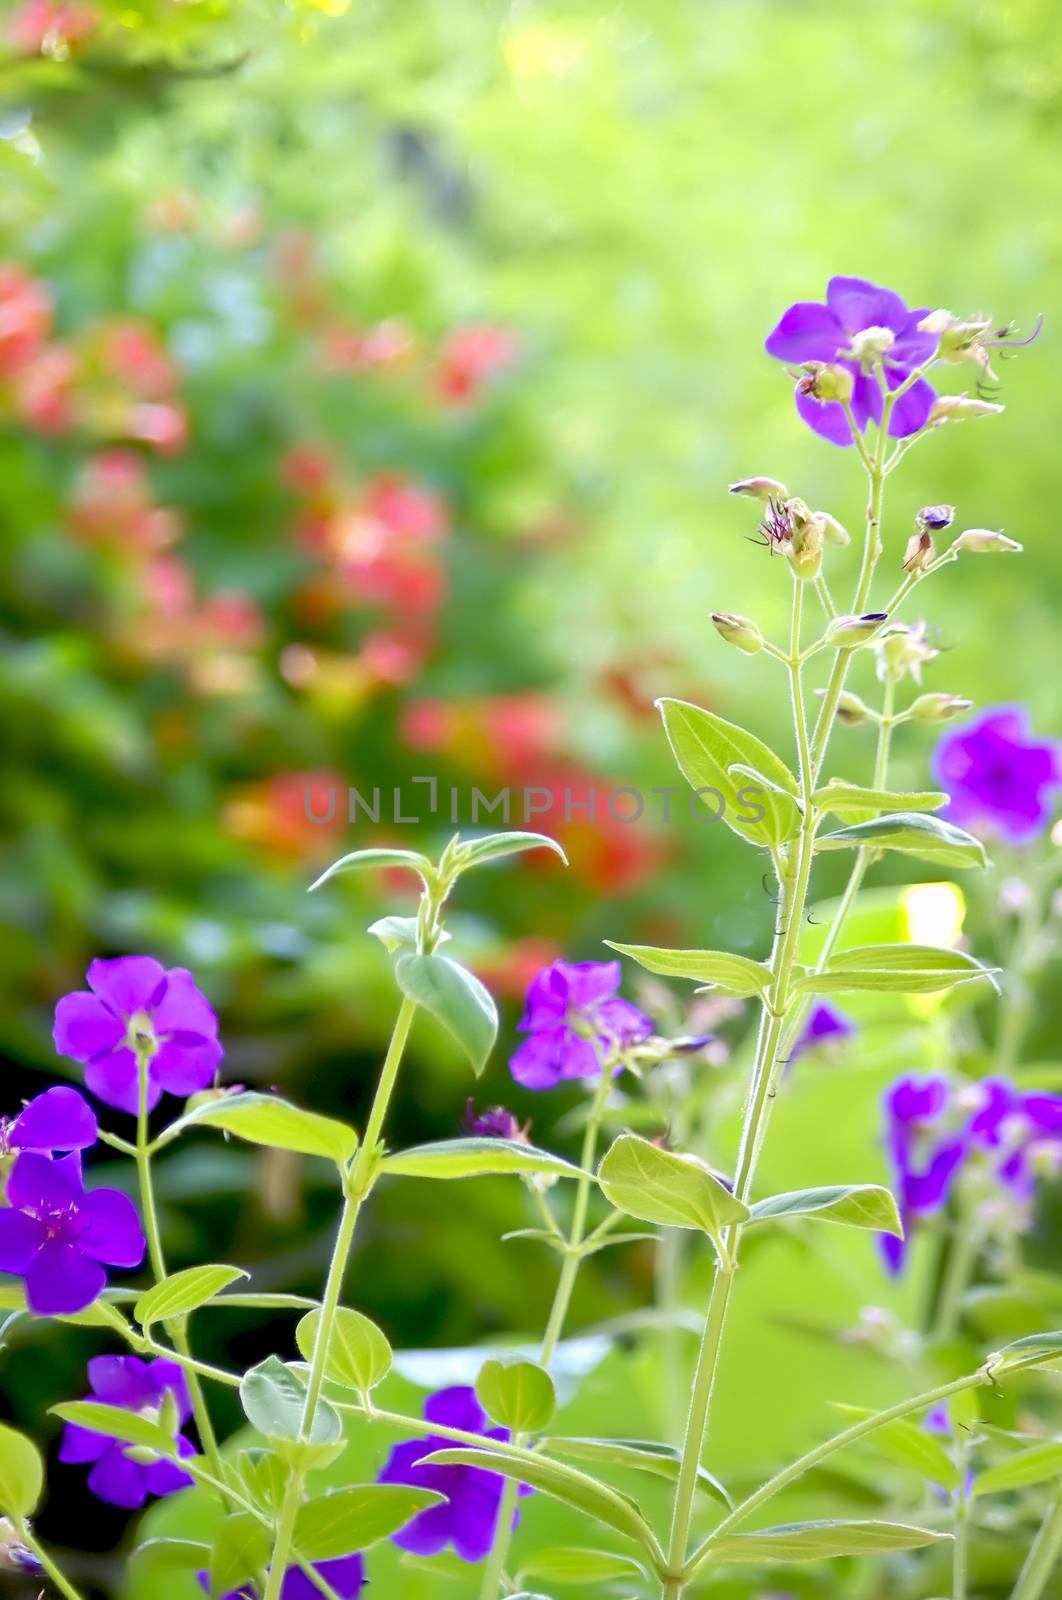 Purple flowers and red flowers in a beautiful garden.